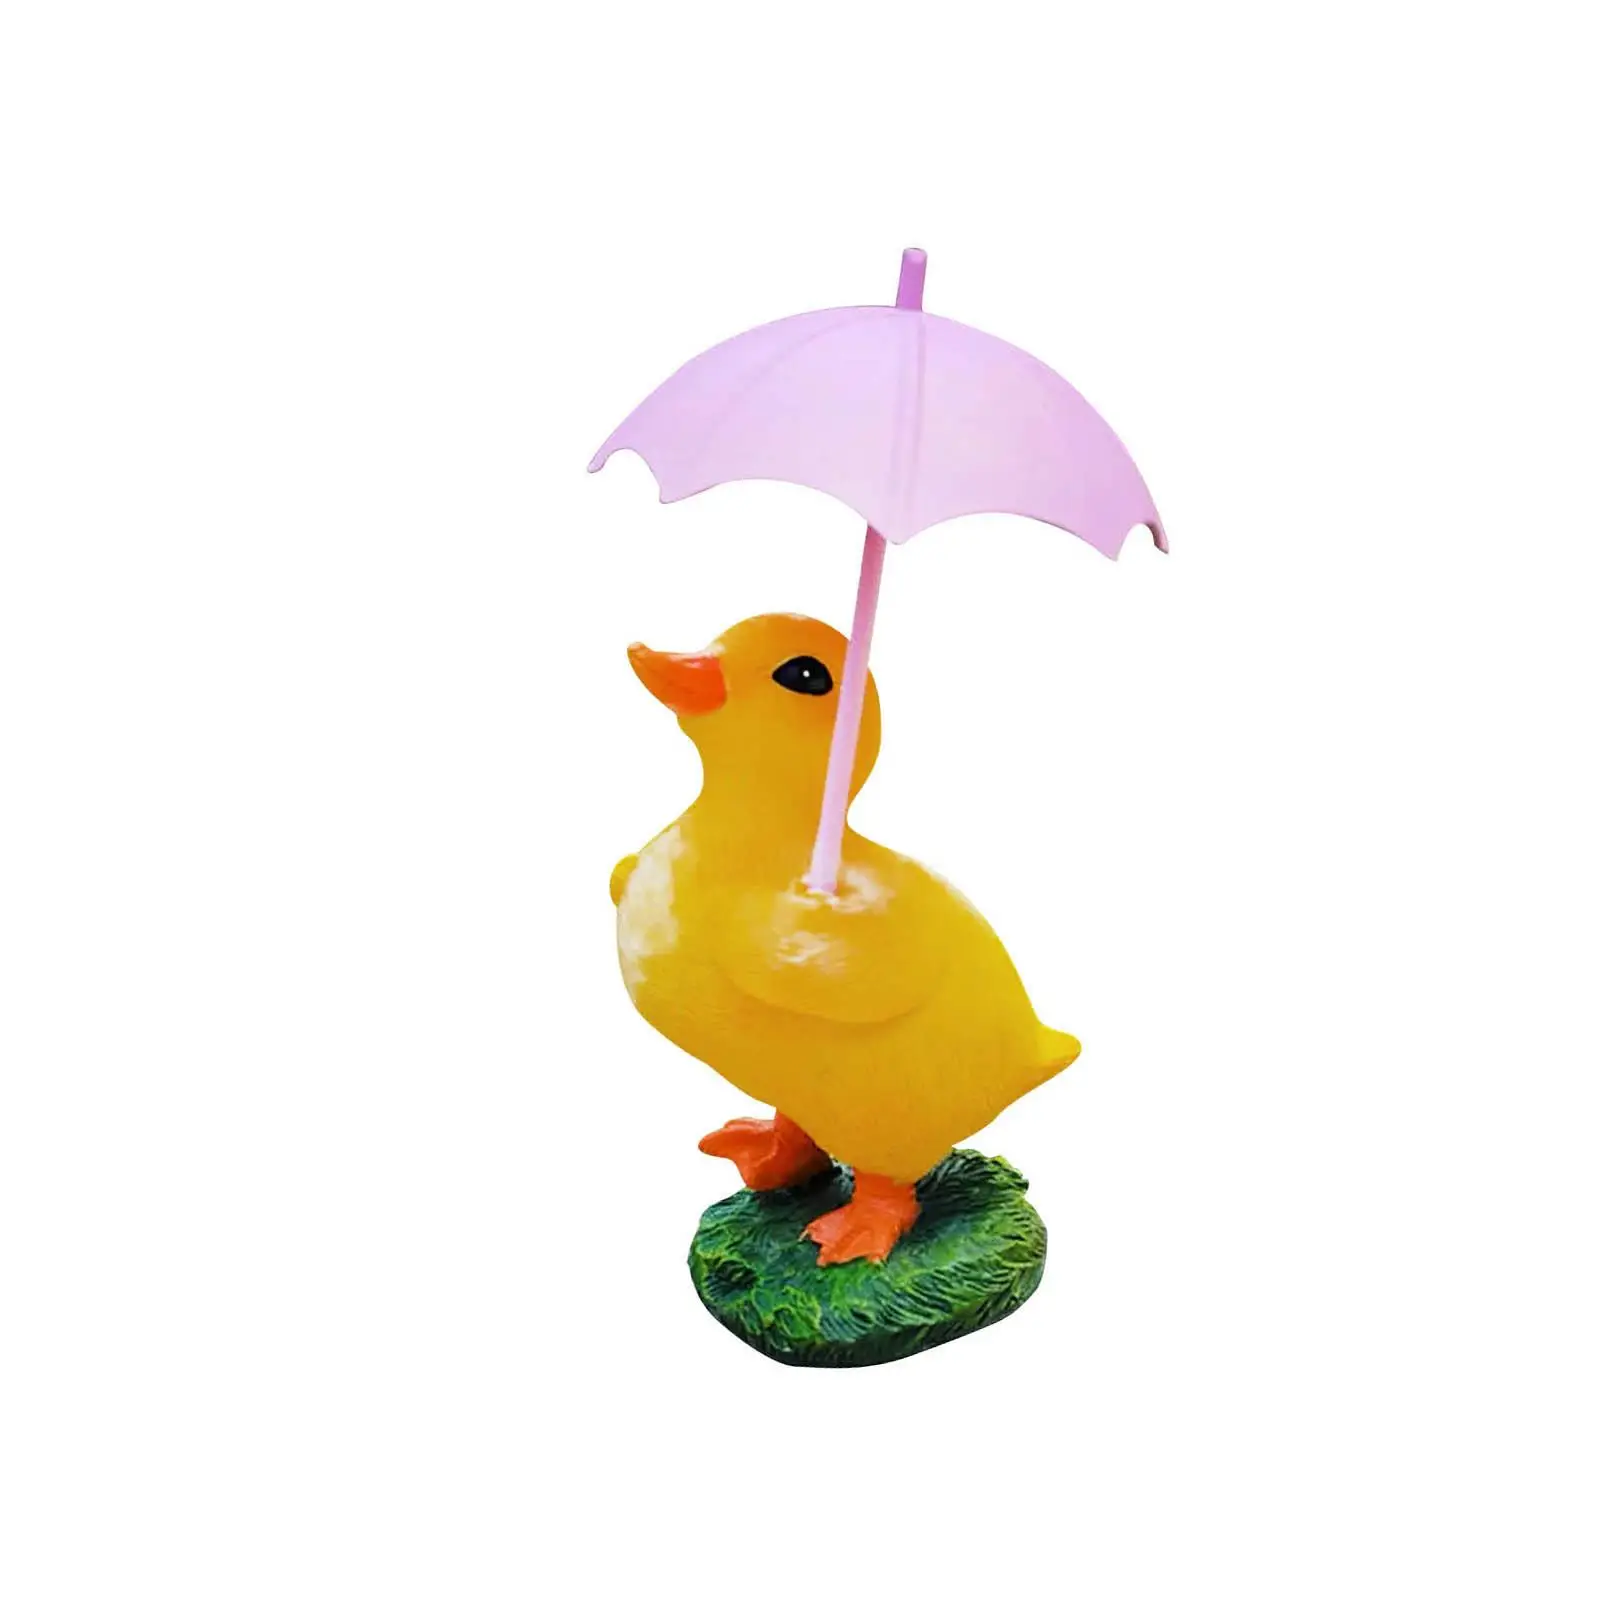 Realistic Duck Statues Collection Outdoor Decor Animals Crafts Lifelike Duck Sculptures for Porch Yard Lawn Courtyard Ornament